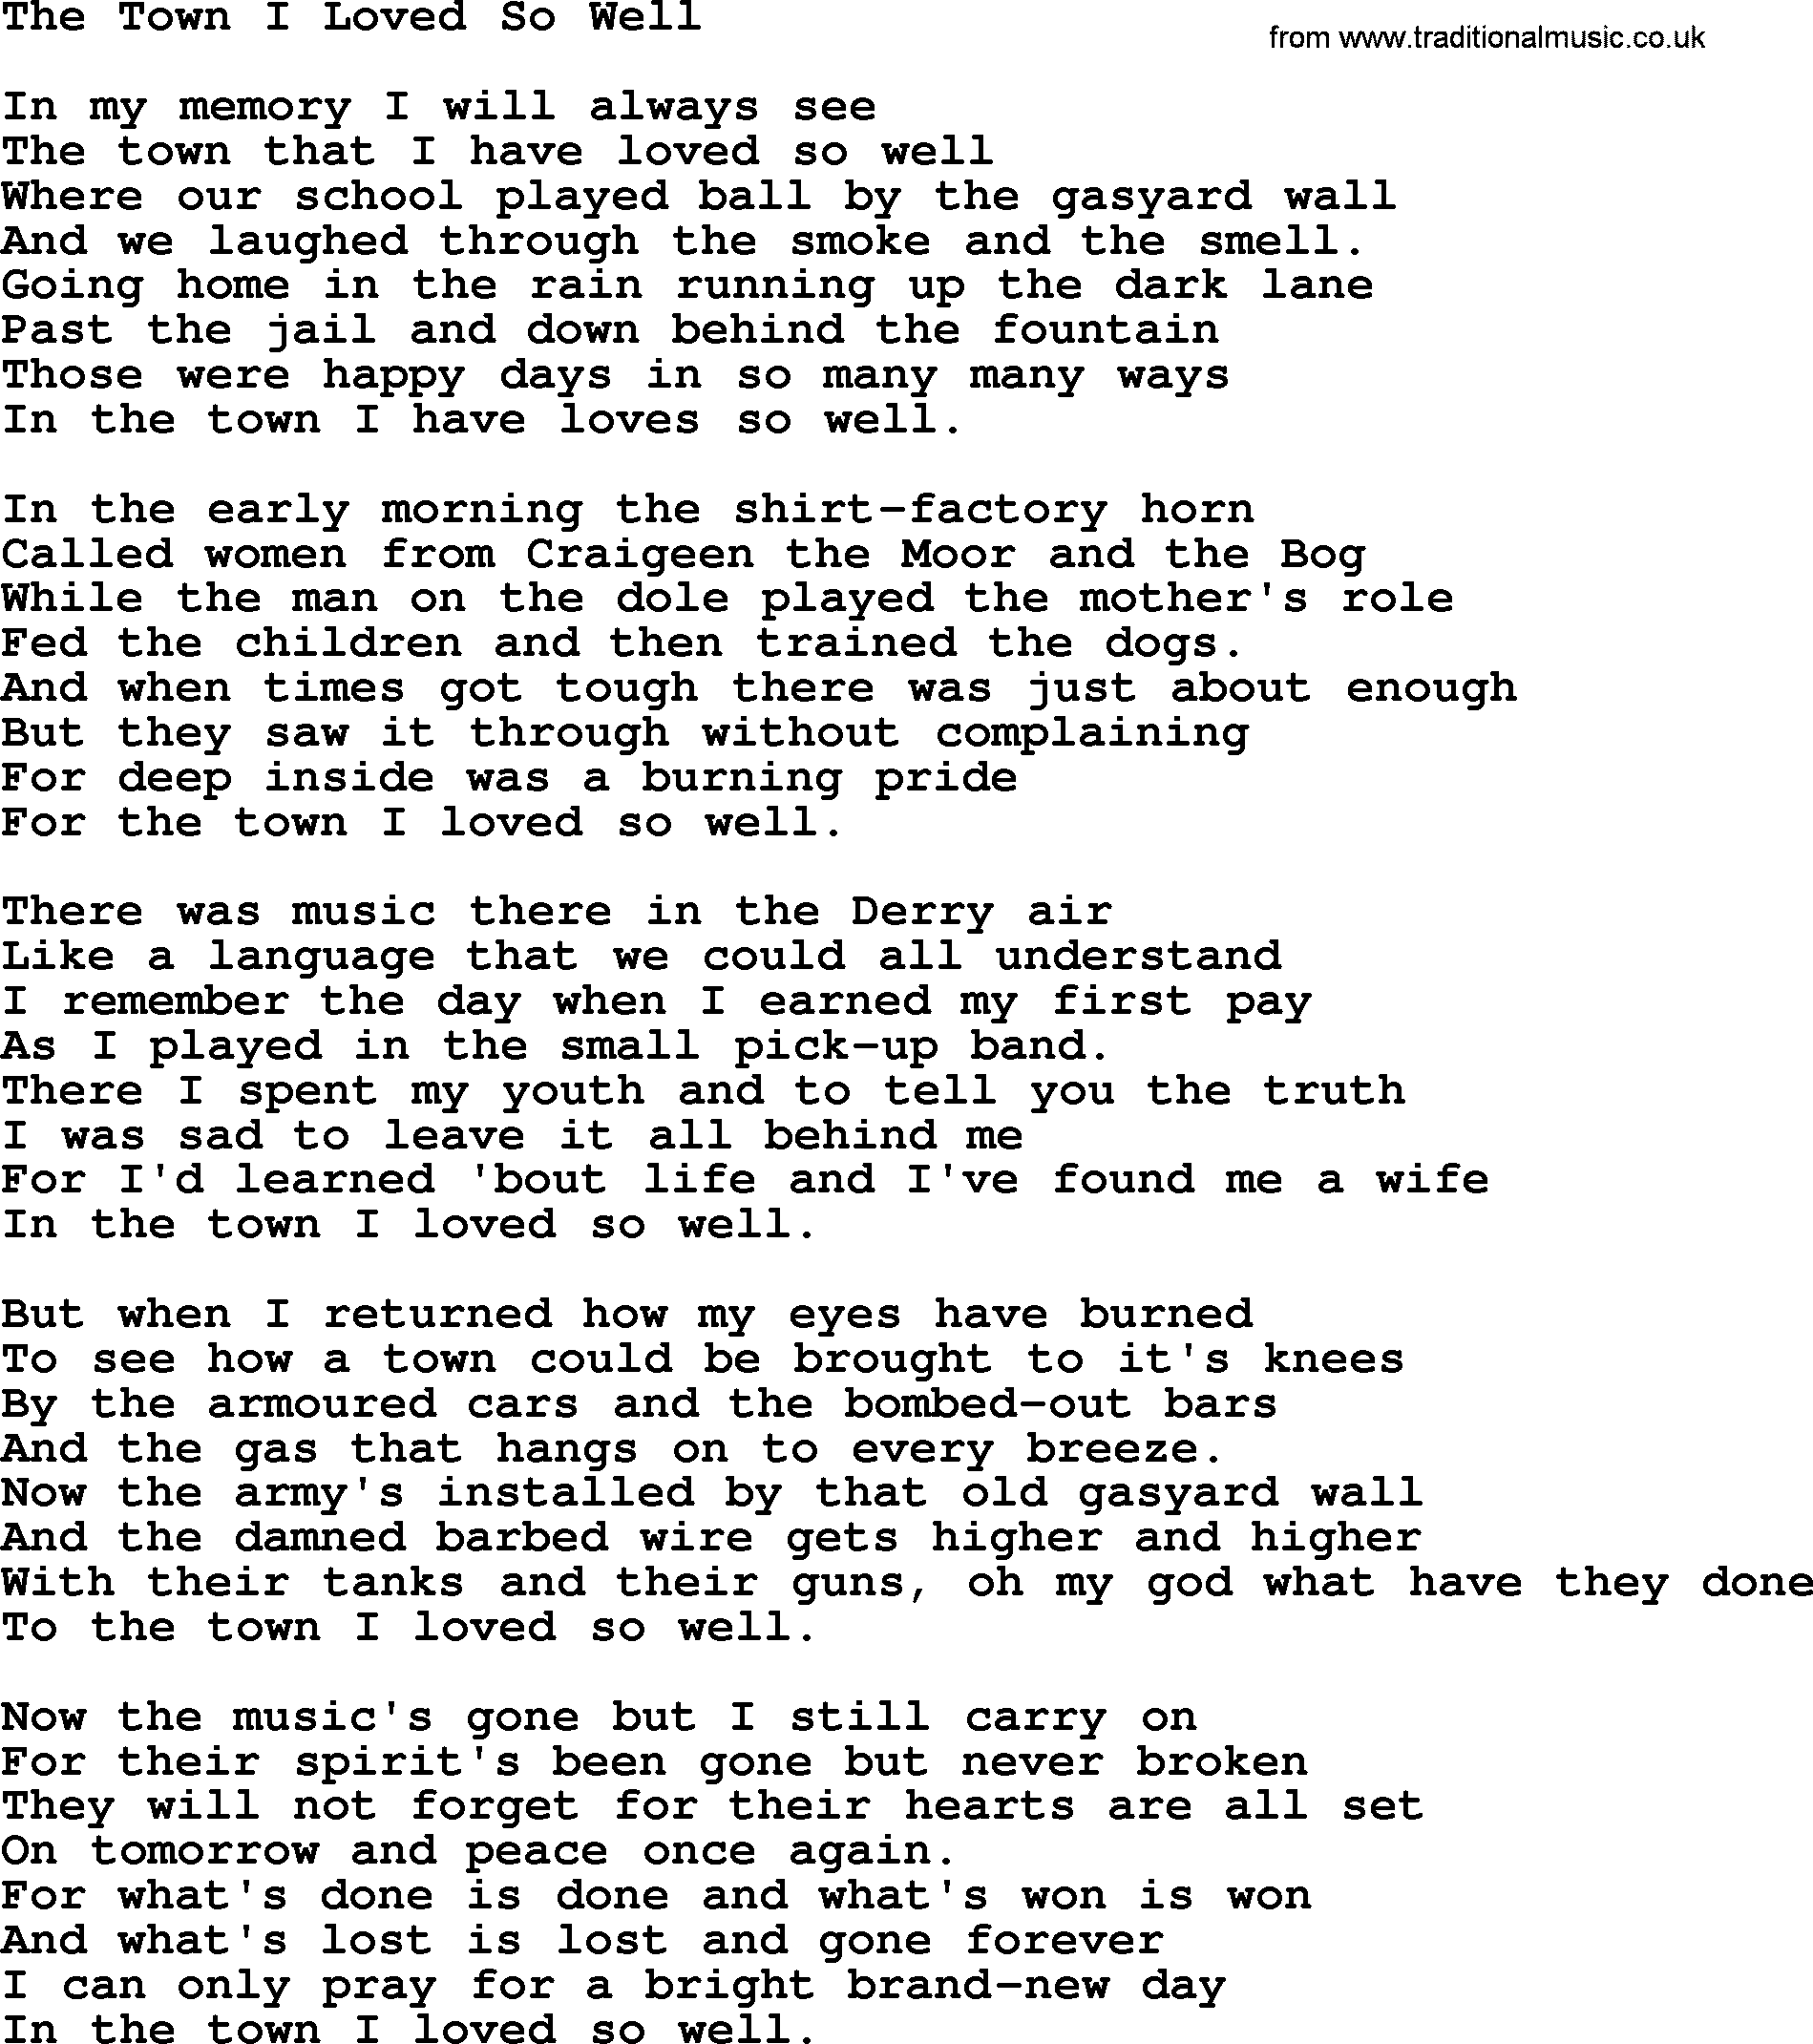 The Dubliners song: The Town I Loved So Well, lyrics